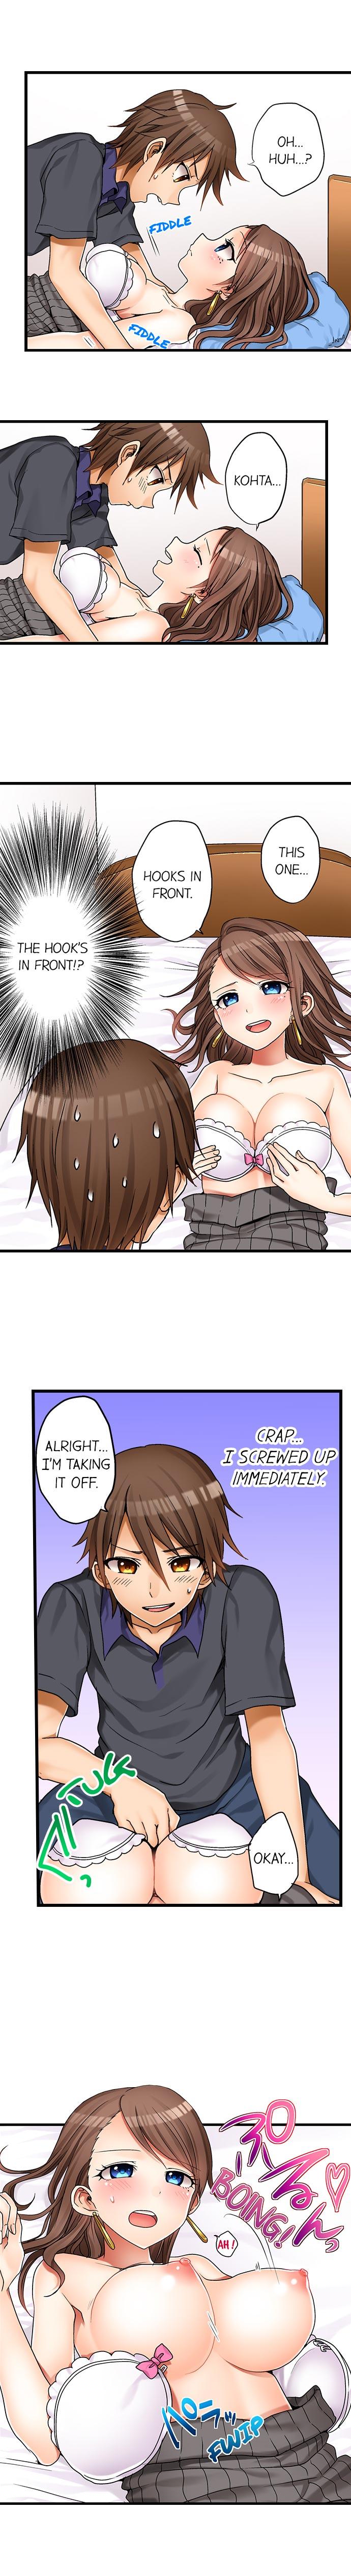 Rub Hatsuecchi no Aite wa... Imouto! My First Time is with.... My Little Sister ! Ametuer Porn - Page 4